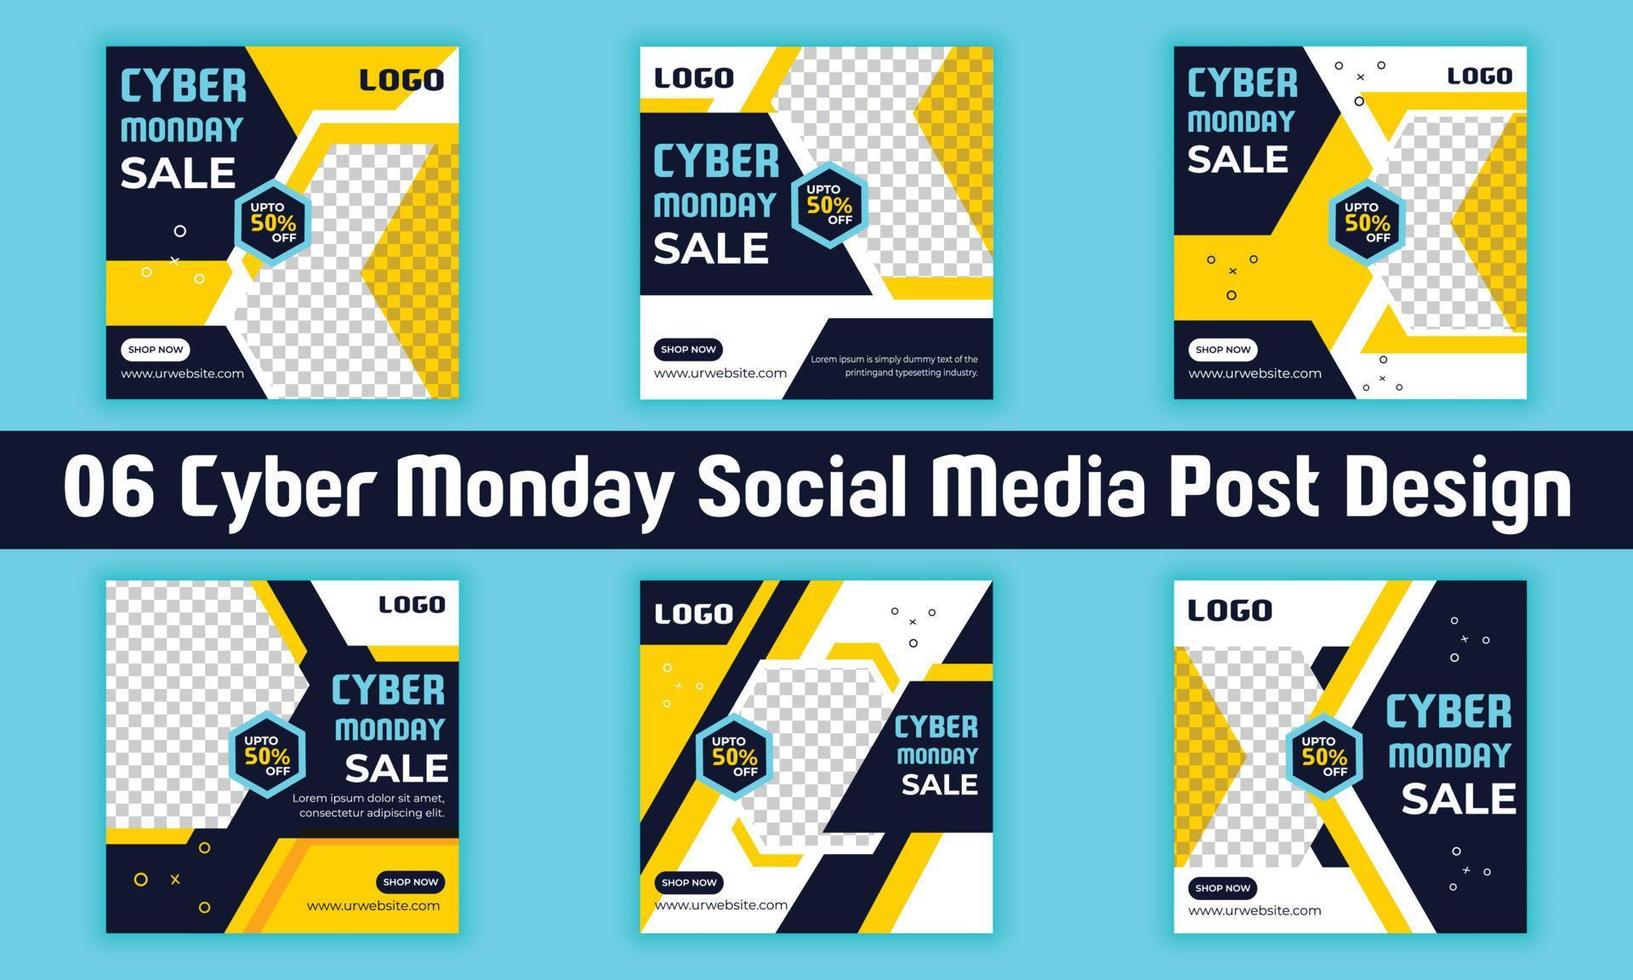 Cyber Monday Sale pack. Social media post templates pack for business promotion on Cyber Monday. Offer social media banner bundle. vector